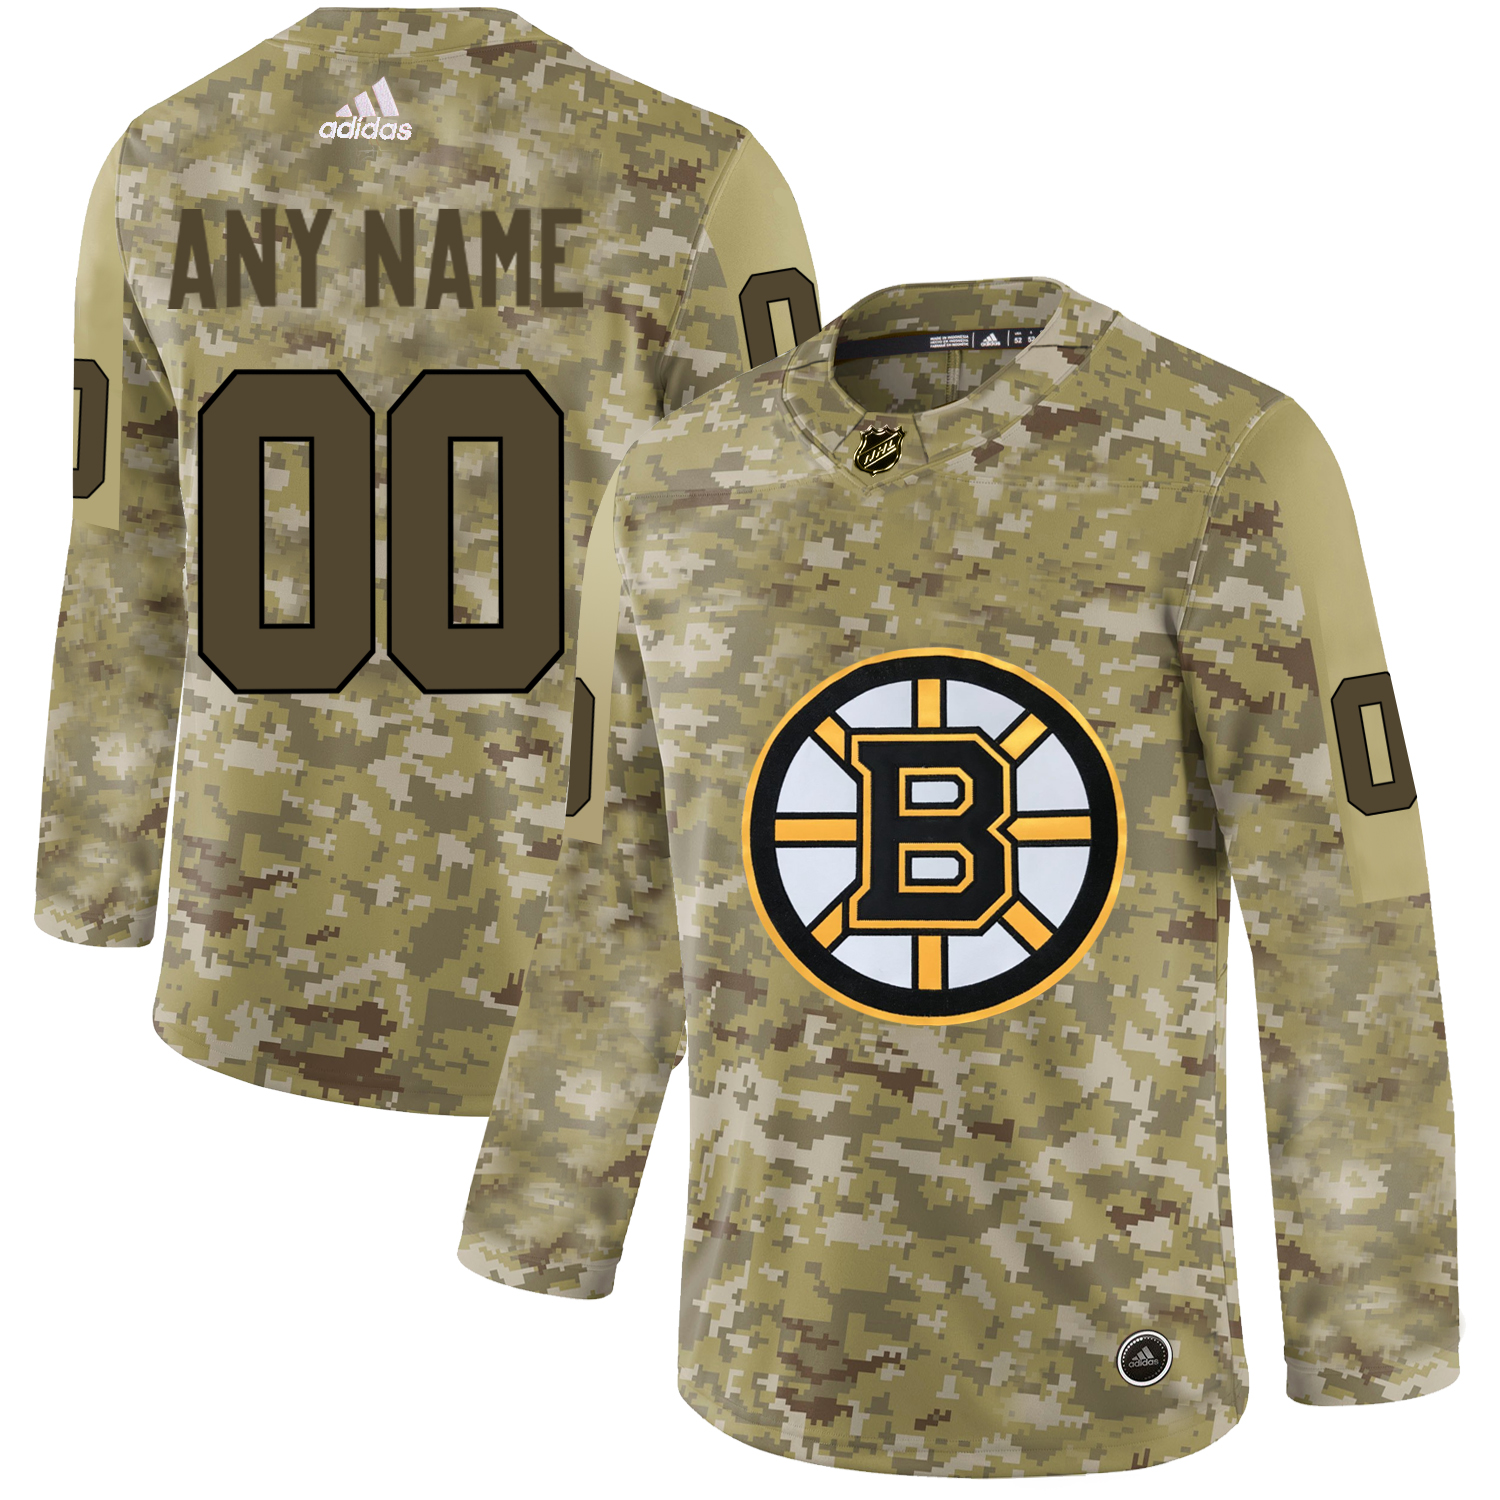 Men's Adidas Bruins Personalized Camo Authentic NHL Jersey